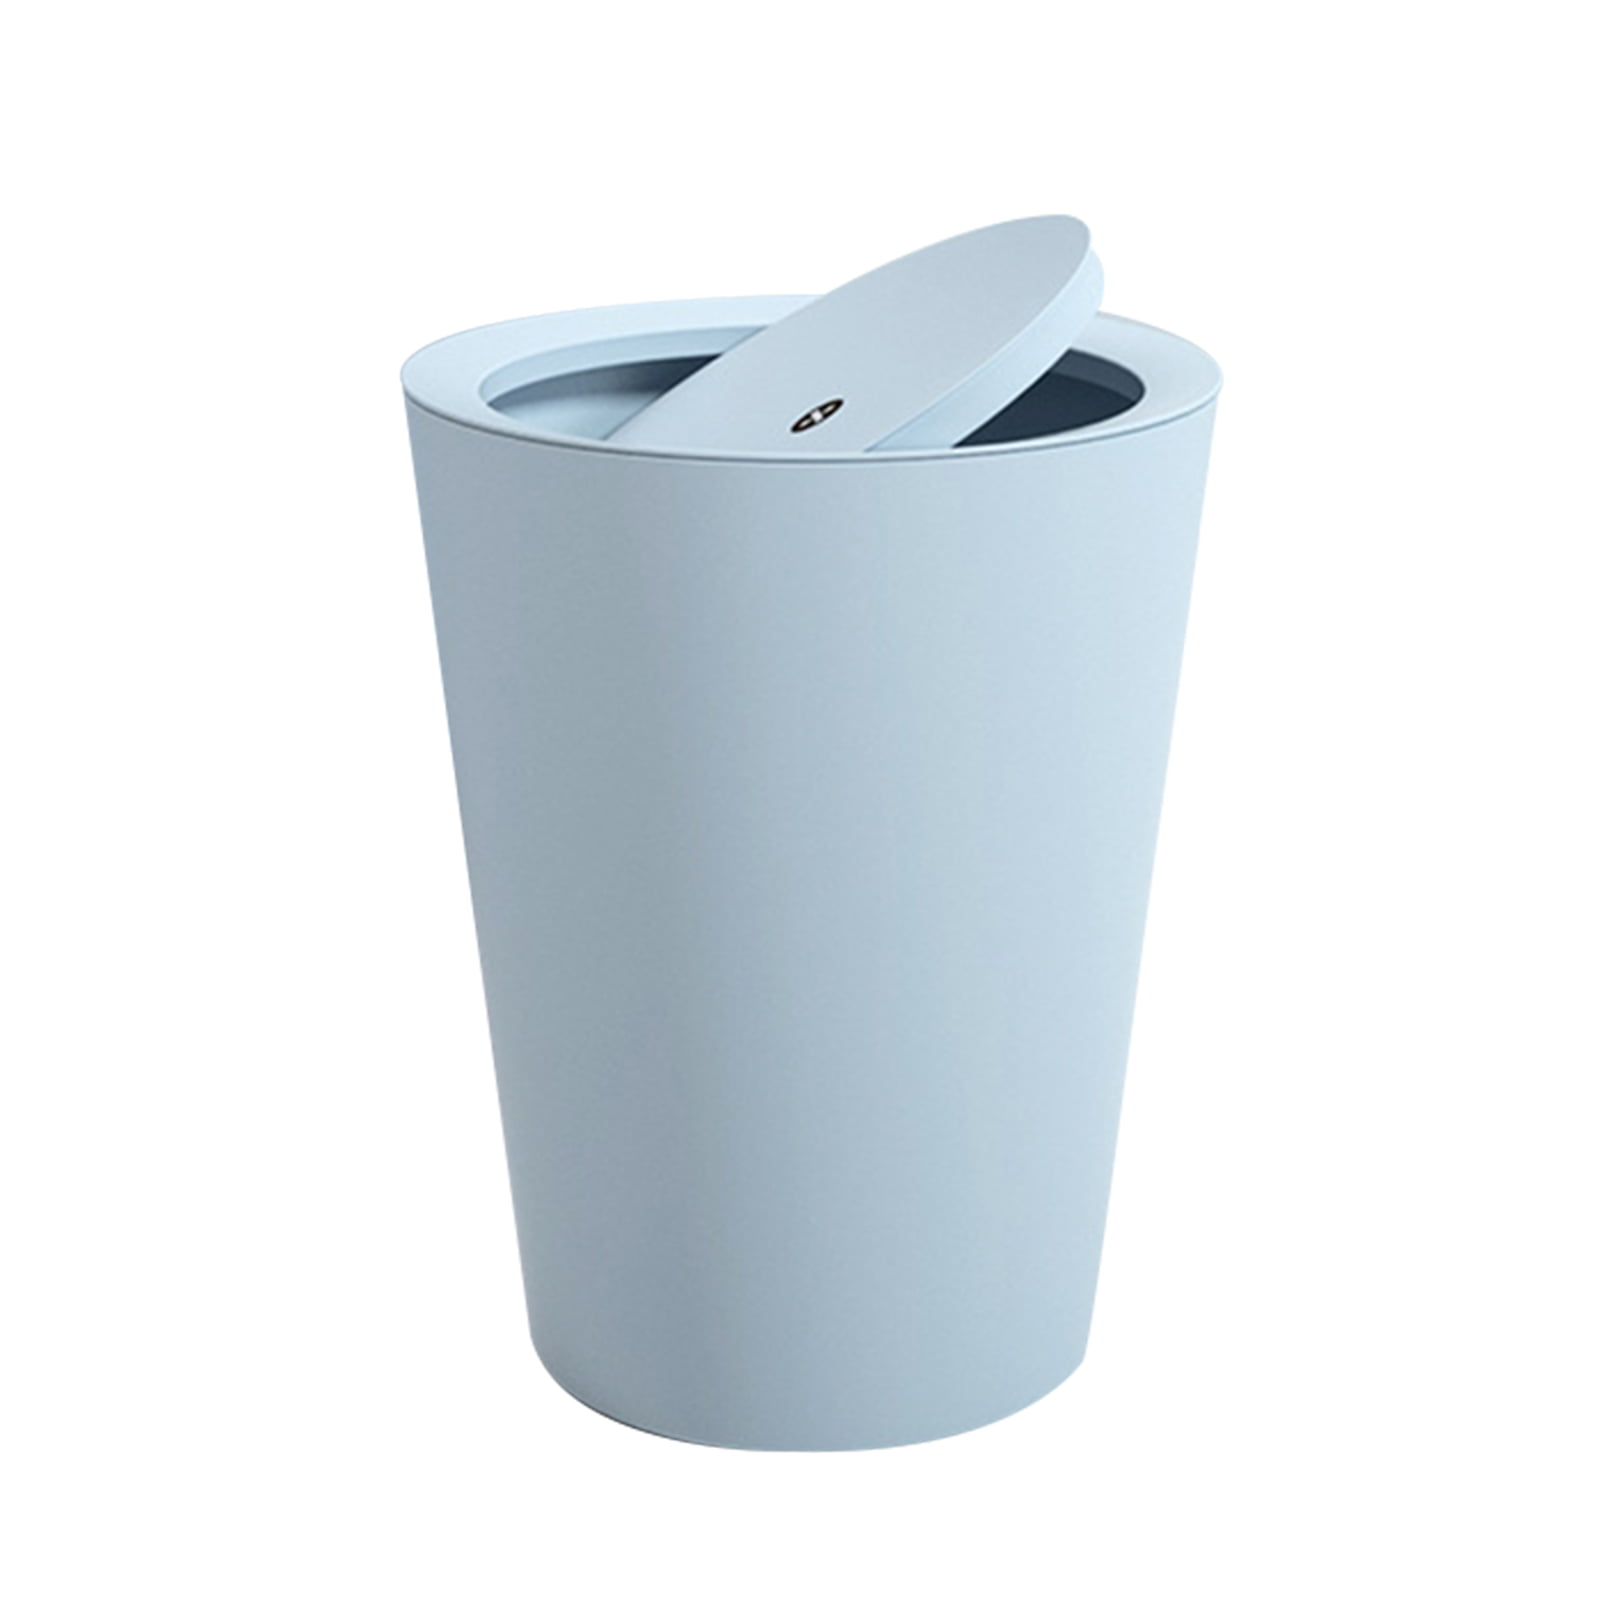 Brights Plastic Bin with Swing Lid 5l Capacity Ideal for Bedroom or Home Office 